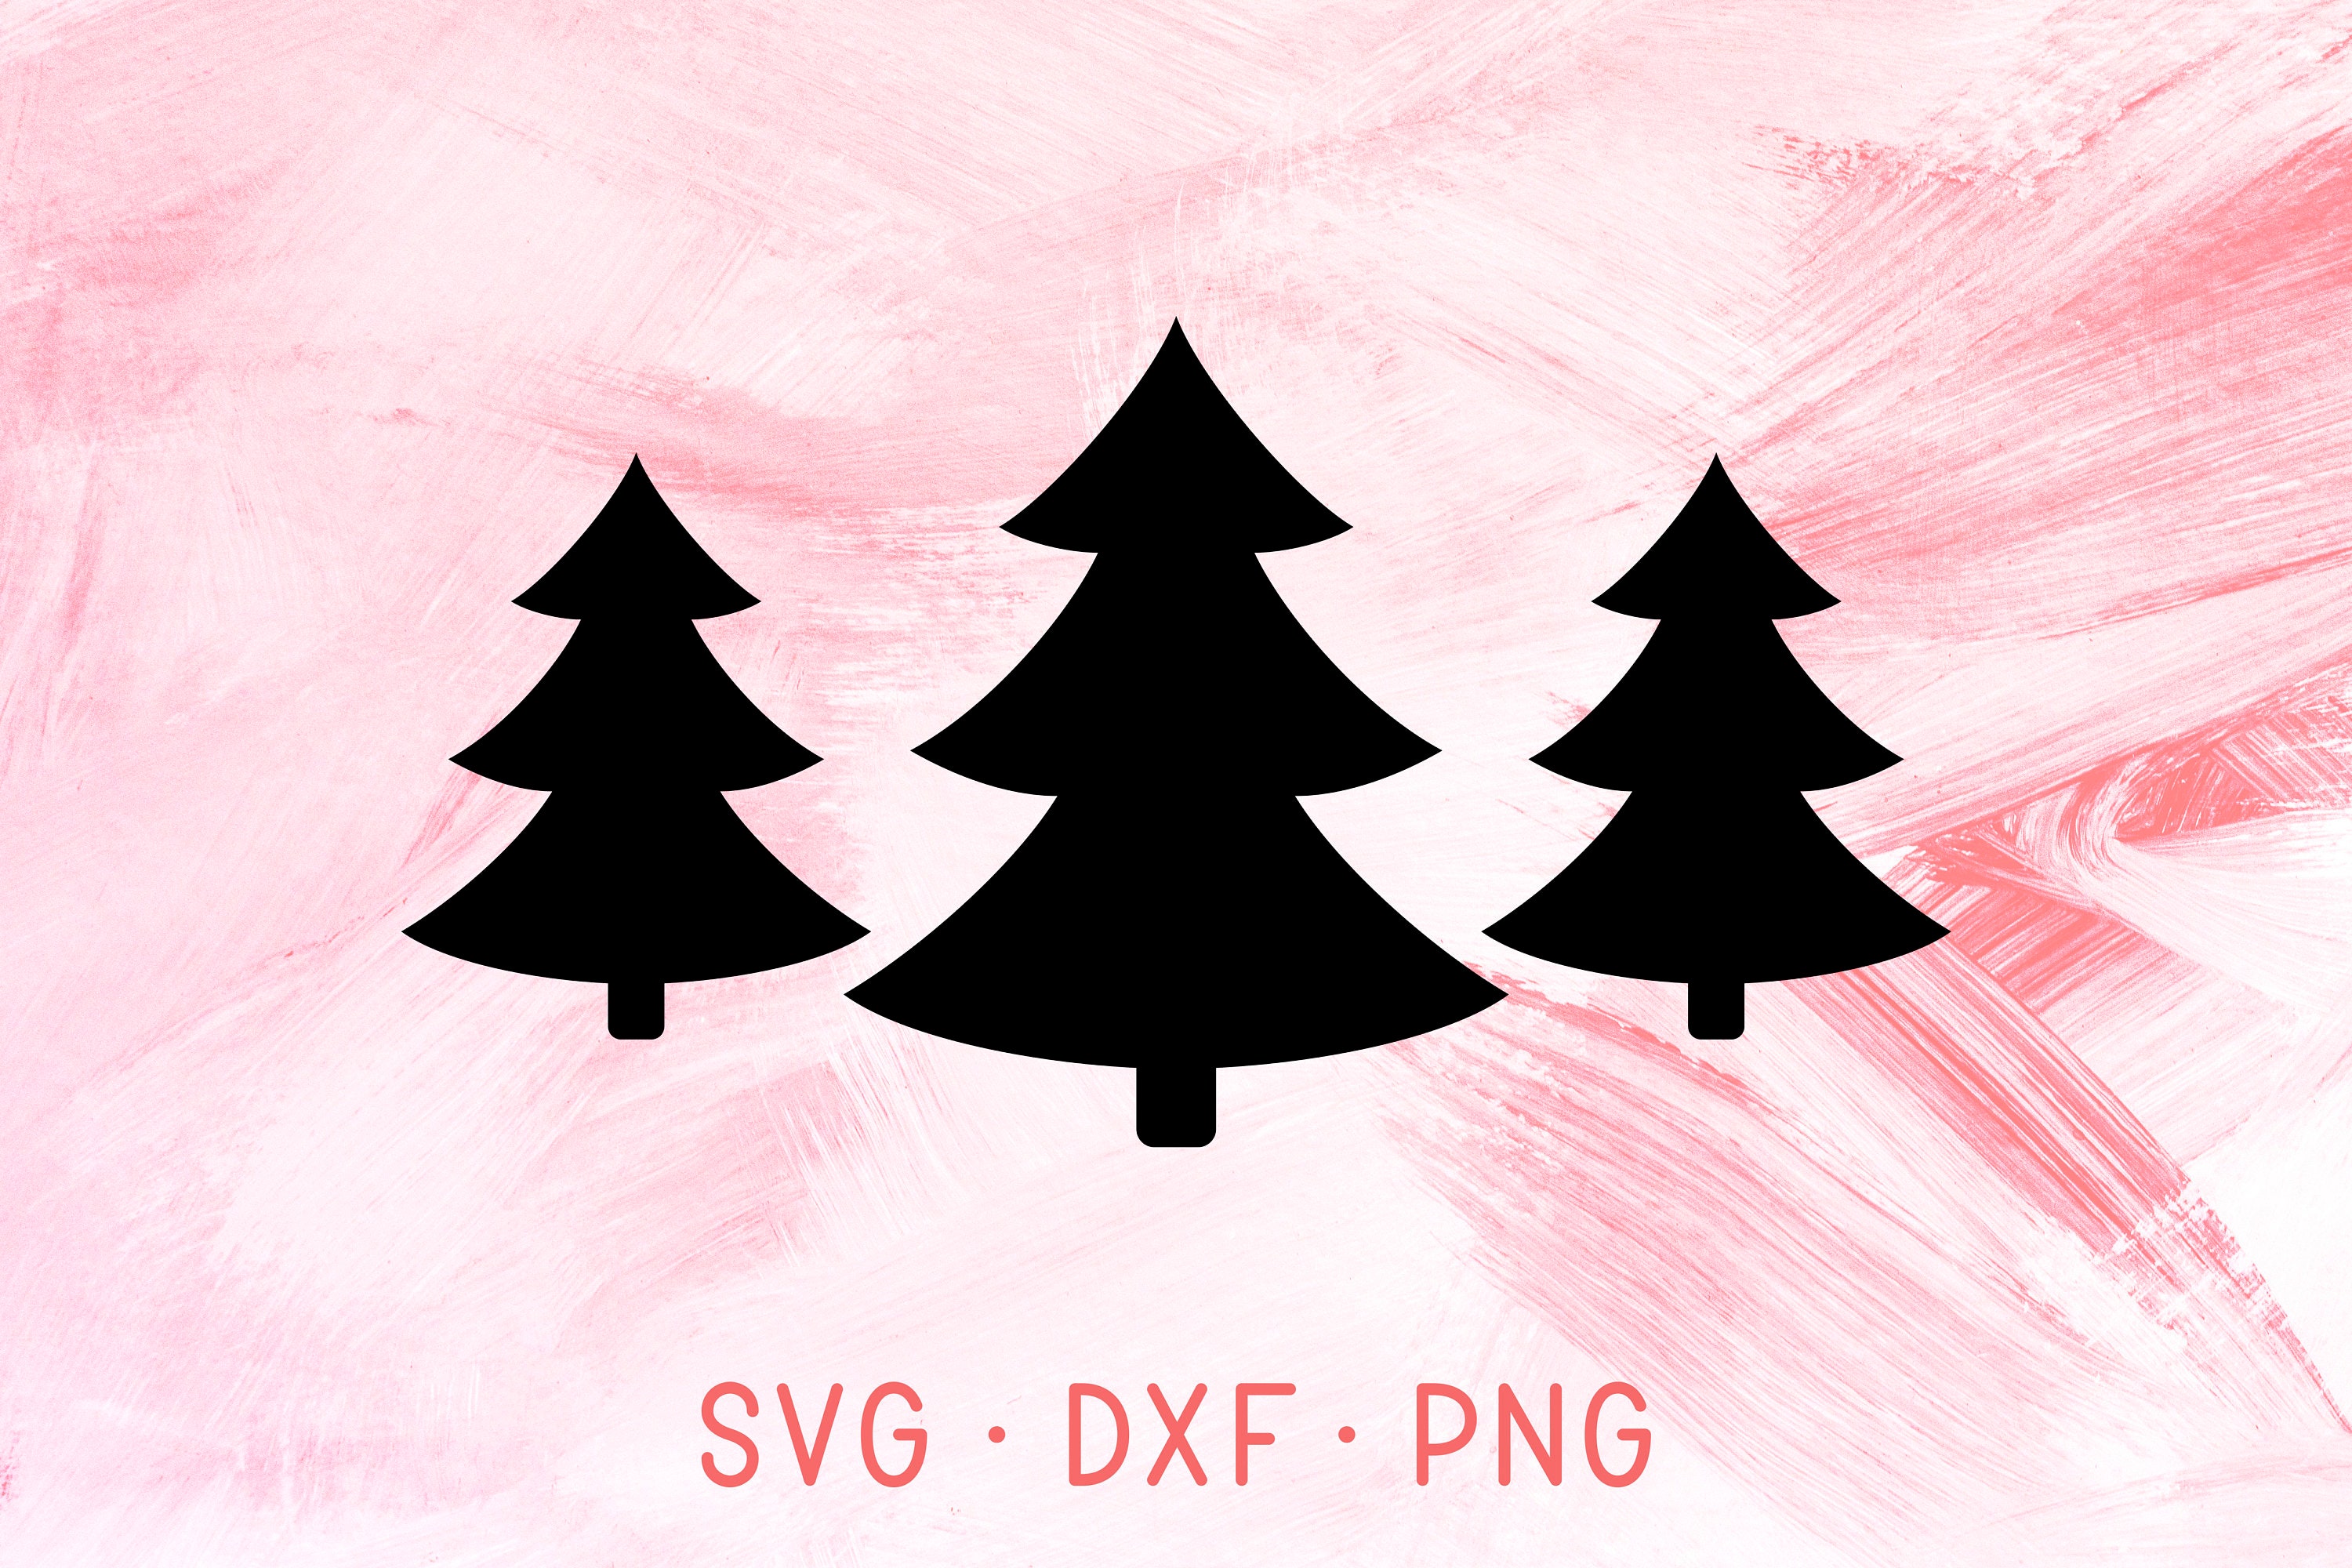 Download Three Christmas Trees SVG DXF PNG Silhouette & Cricut Cutting | Etsy